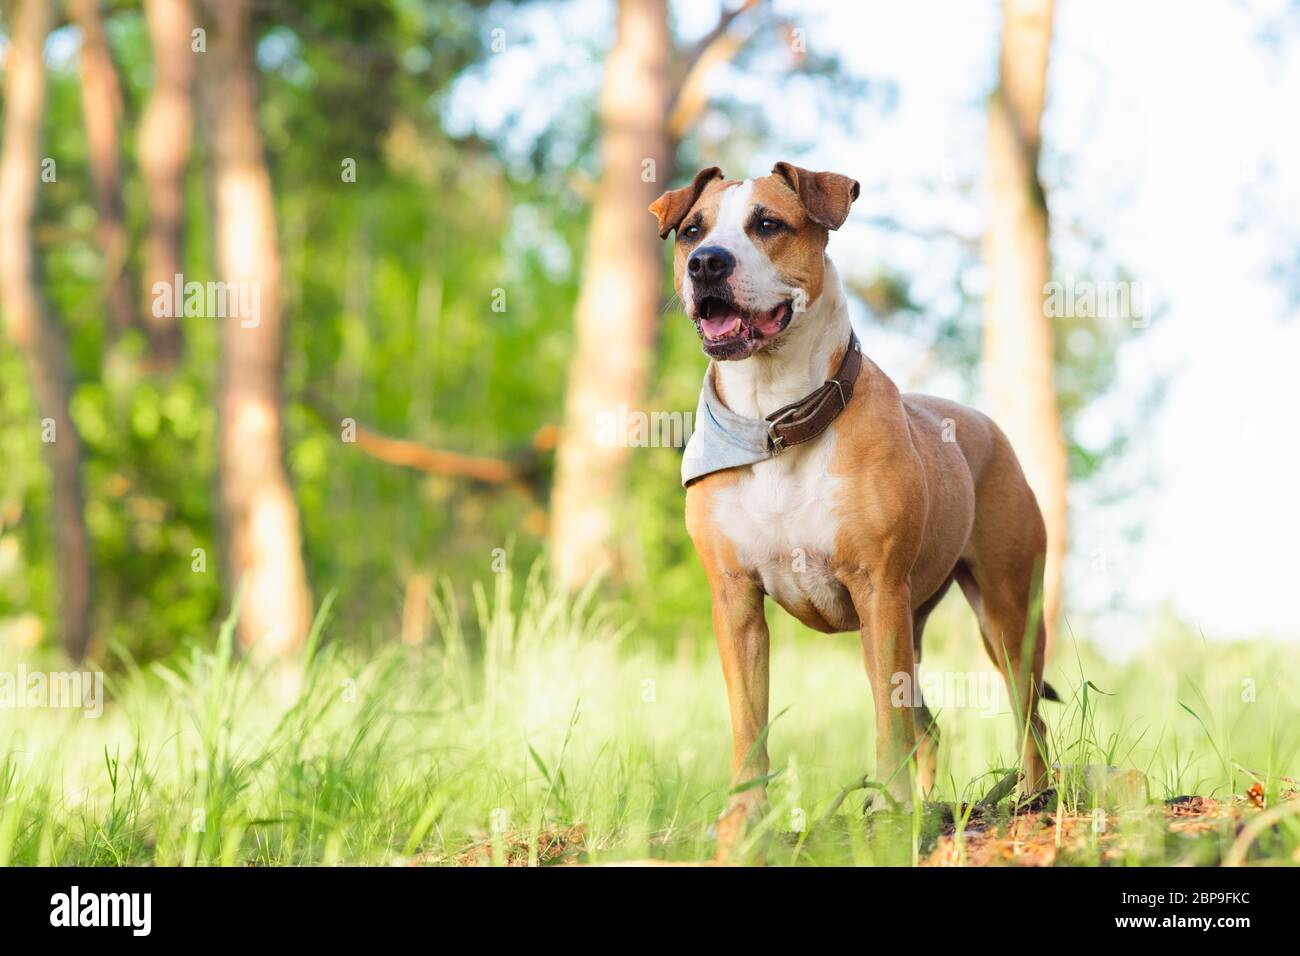 Adventure dog in the forest, bright sun lit image. Staffordshire terrier mutt outdoors, happy and healthy pets concept Stock Photo